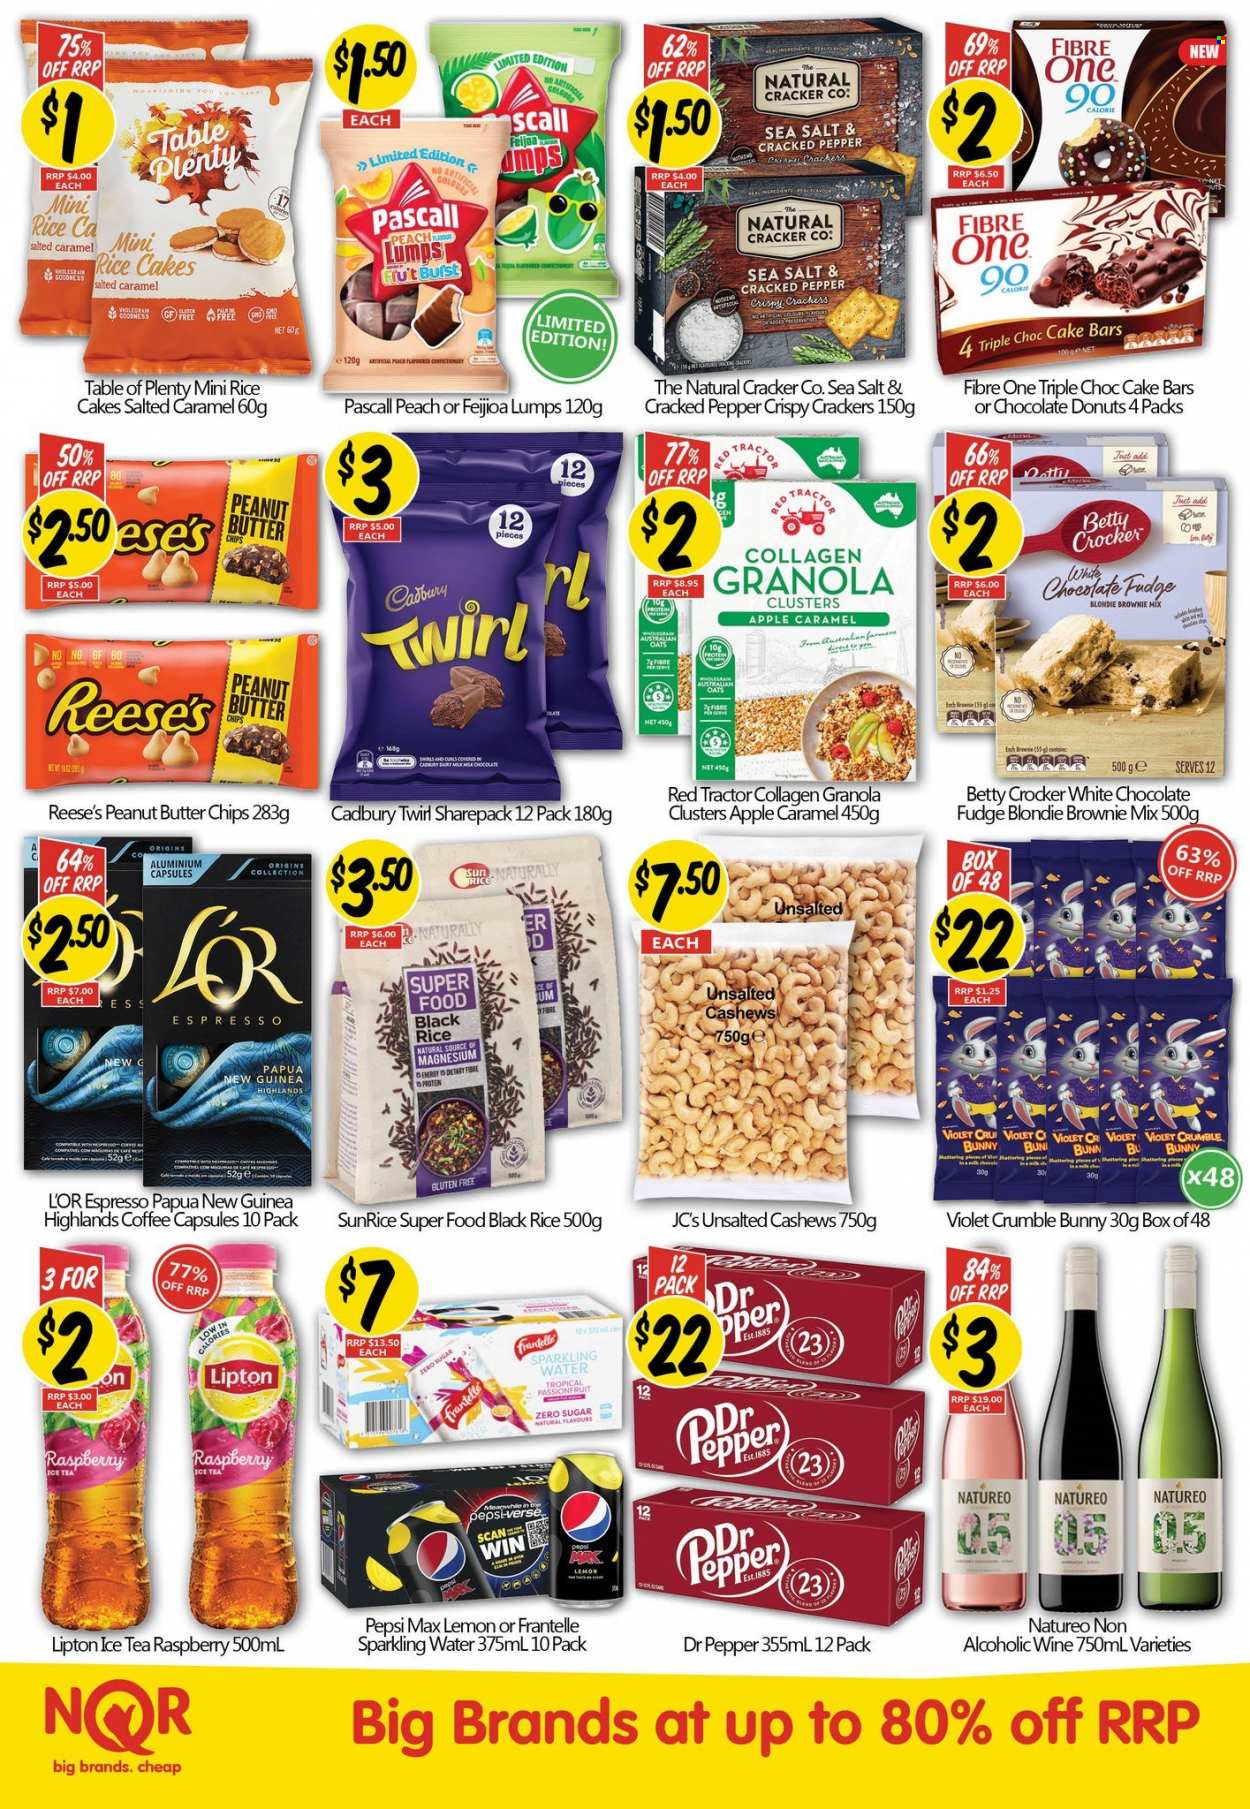 thumbnail - NQR Catalogue - 29 Mar 2023 - 11 Apr 2023 - Sales products - donut, brownie mix, eggs, Reese's, fudge, milk chocolate, crackers, Cadbury, Dairy Milk, chips, oats, granola, peanut butter, cashews, Pepsi, Lipton, Pepsi Max, ice tea, Dr. Pepper, sparkling water, water, tea, coffee, Nespresso, coffee capsules, L'Or, wine, Plenty, magnesium. Page 2.